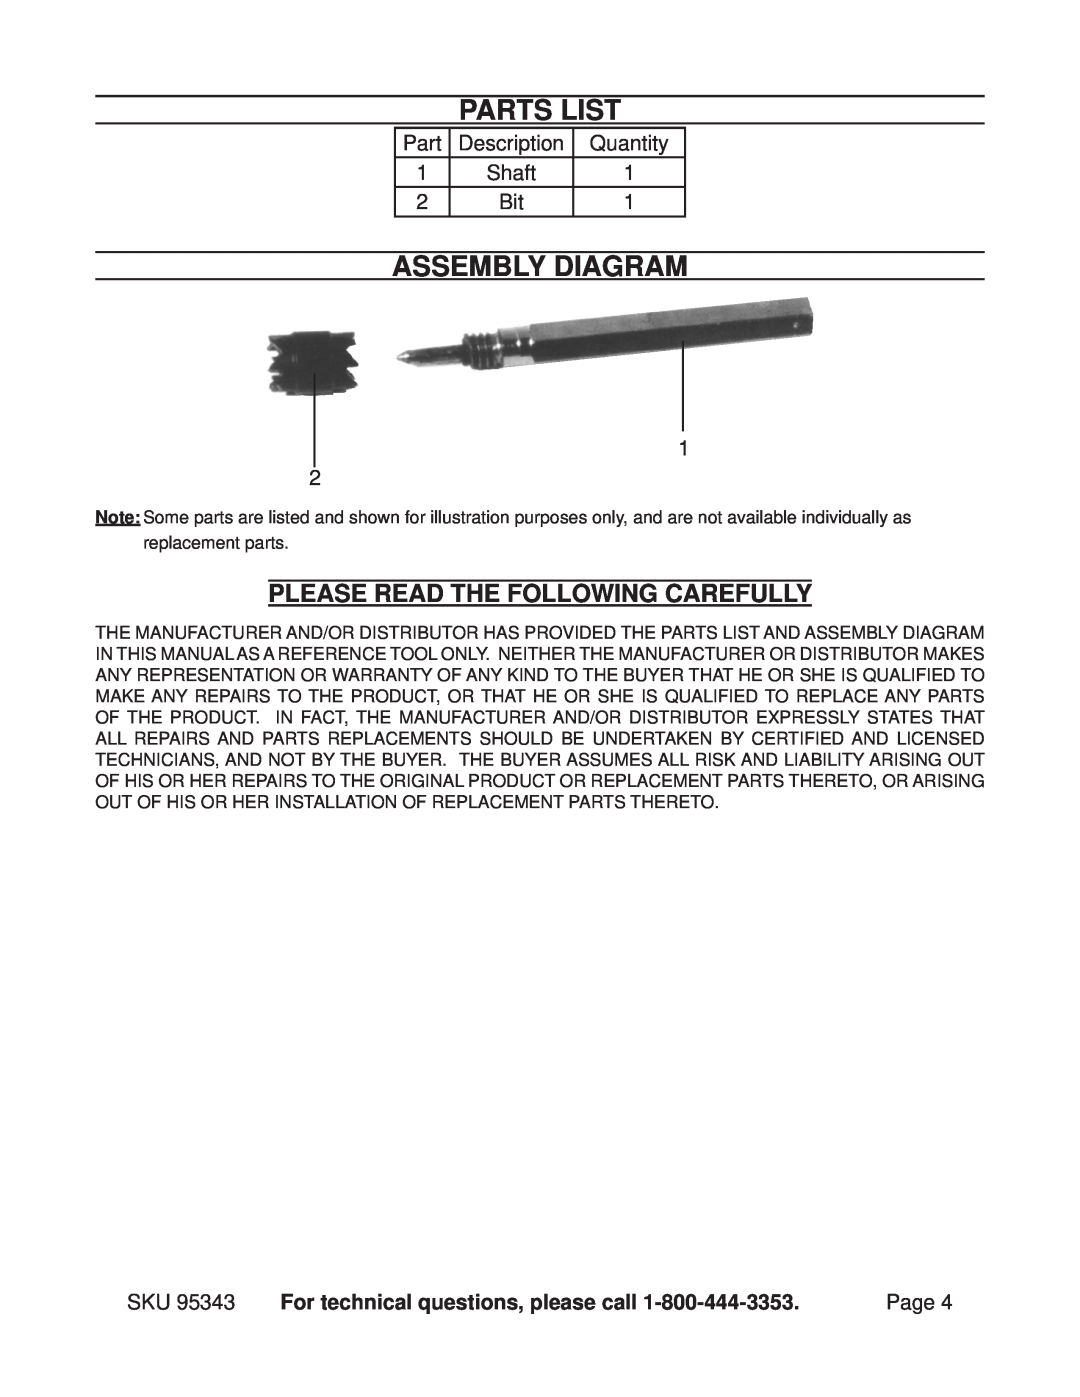 Harbor Freight Tools 95343 Parts List, Assembly Diagram, Please Read The Following Carefully, Description, Quantity, Shaft 